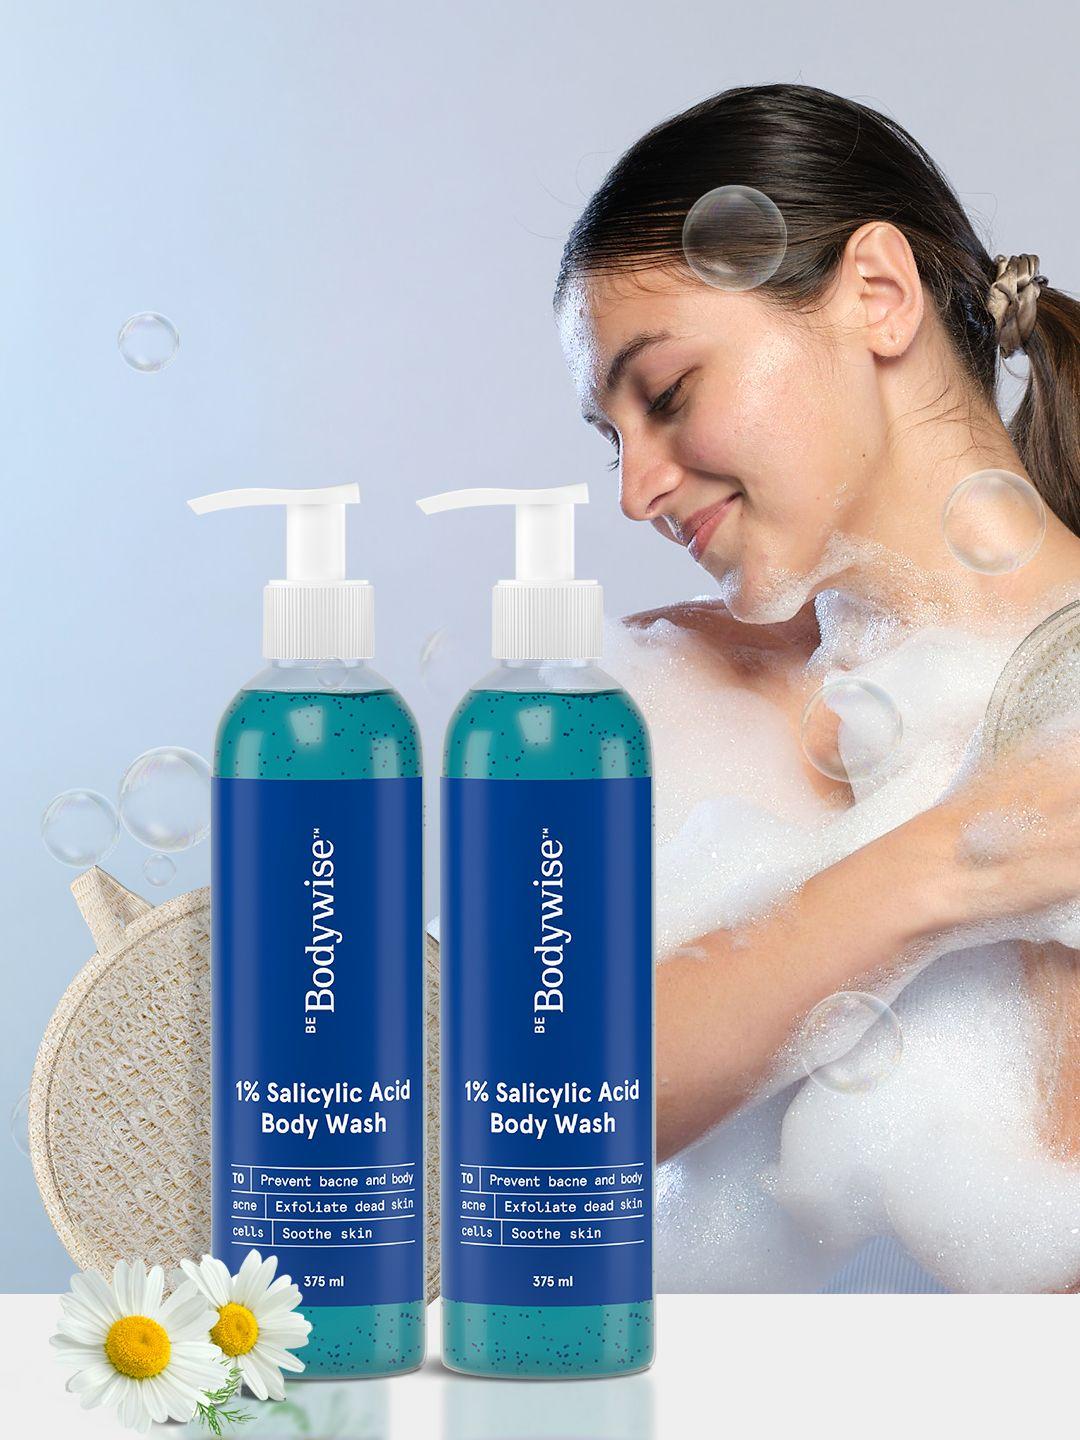 be-bodywise-set-of-2-salicylic-acid-body-wash-375ml-each-with-free-loofah-to-prevent-bacne